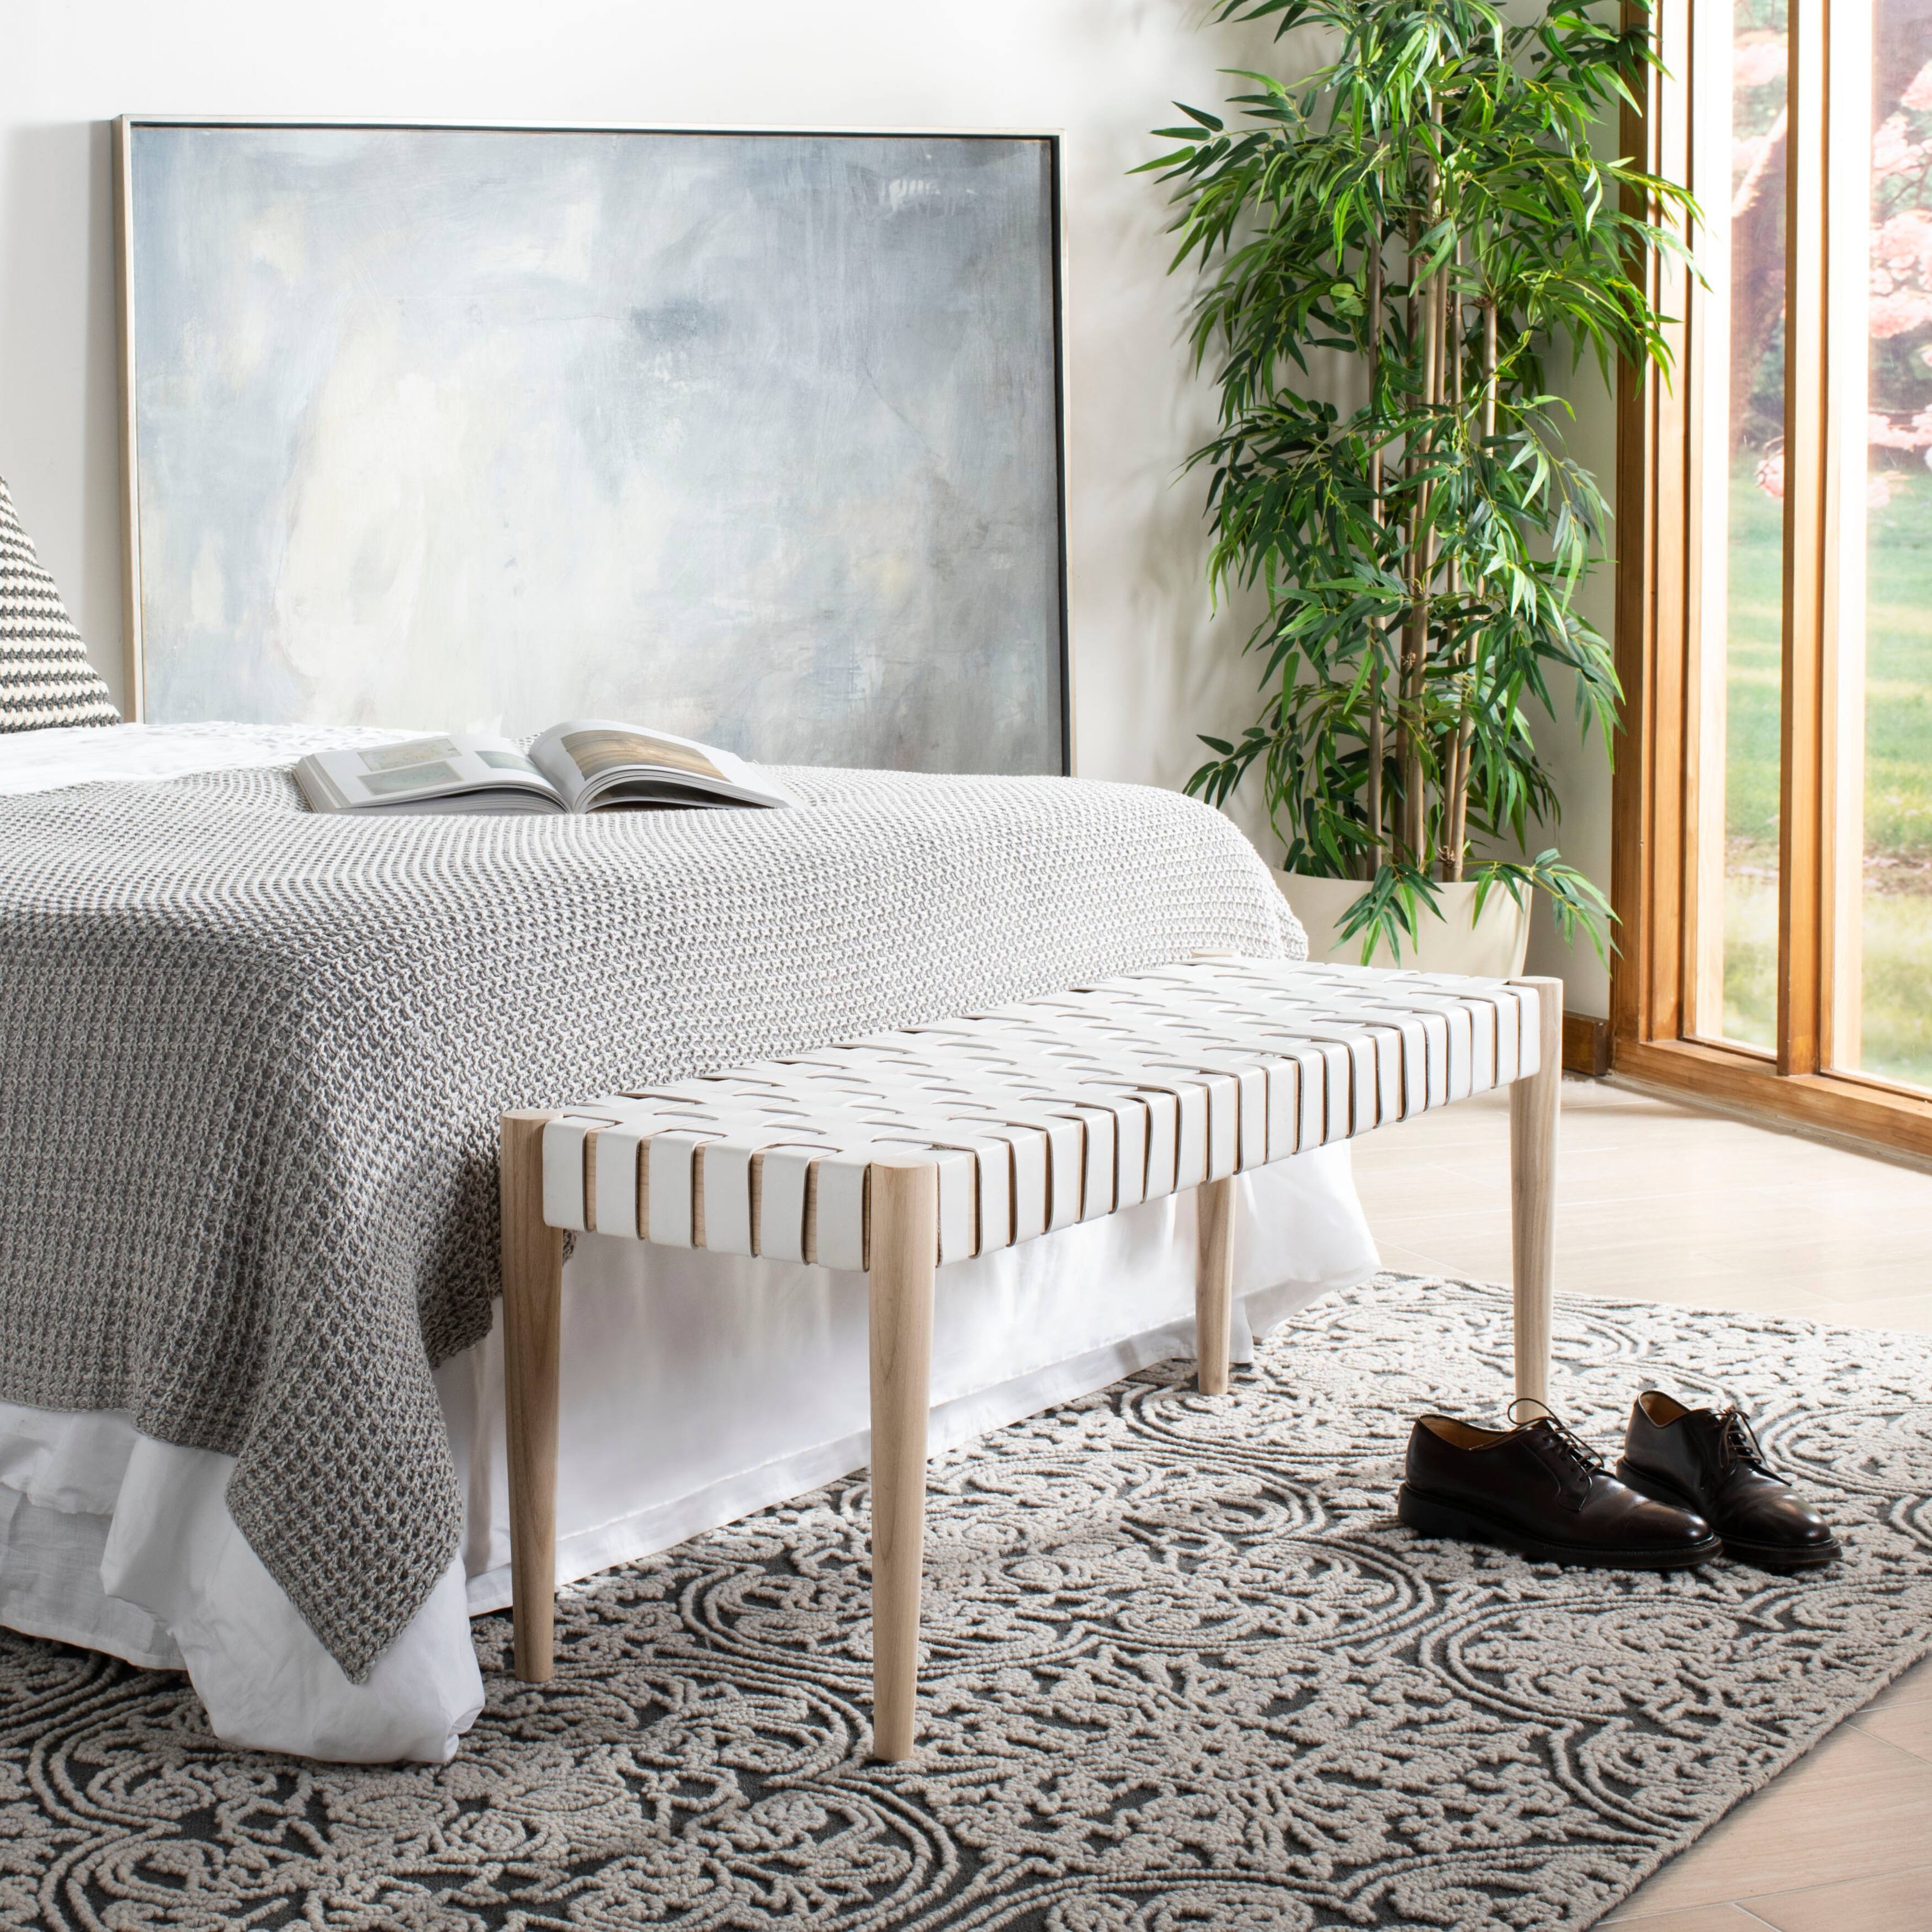 SAFAVIEH Amalia White/Natural Leather Woven Bench. - On Sale - Bed Bath ...